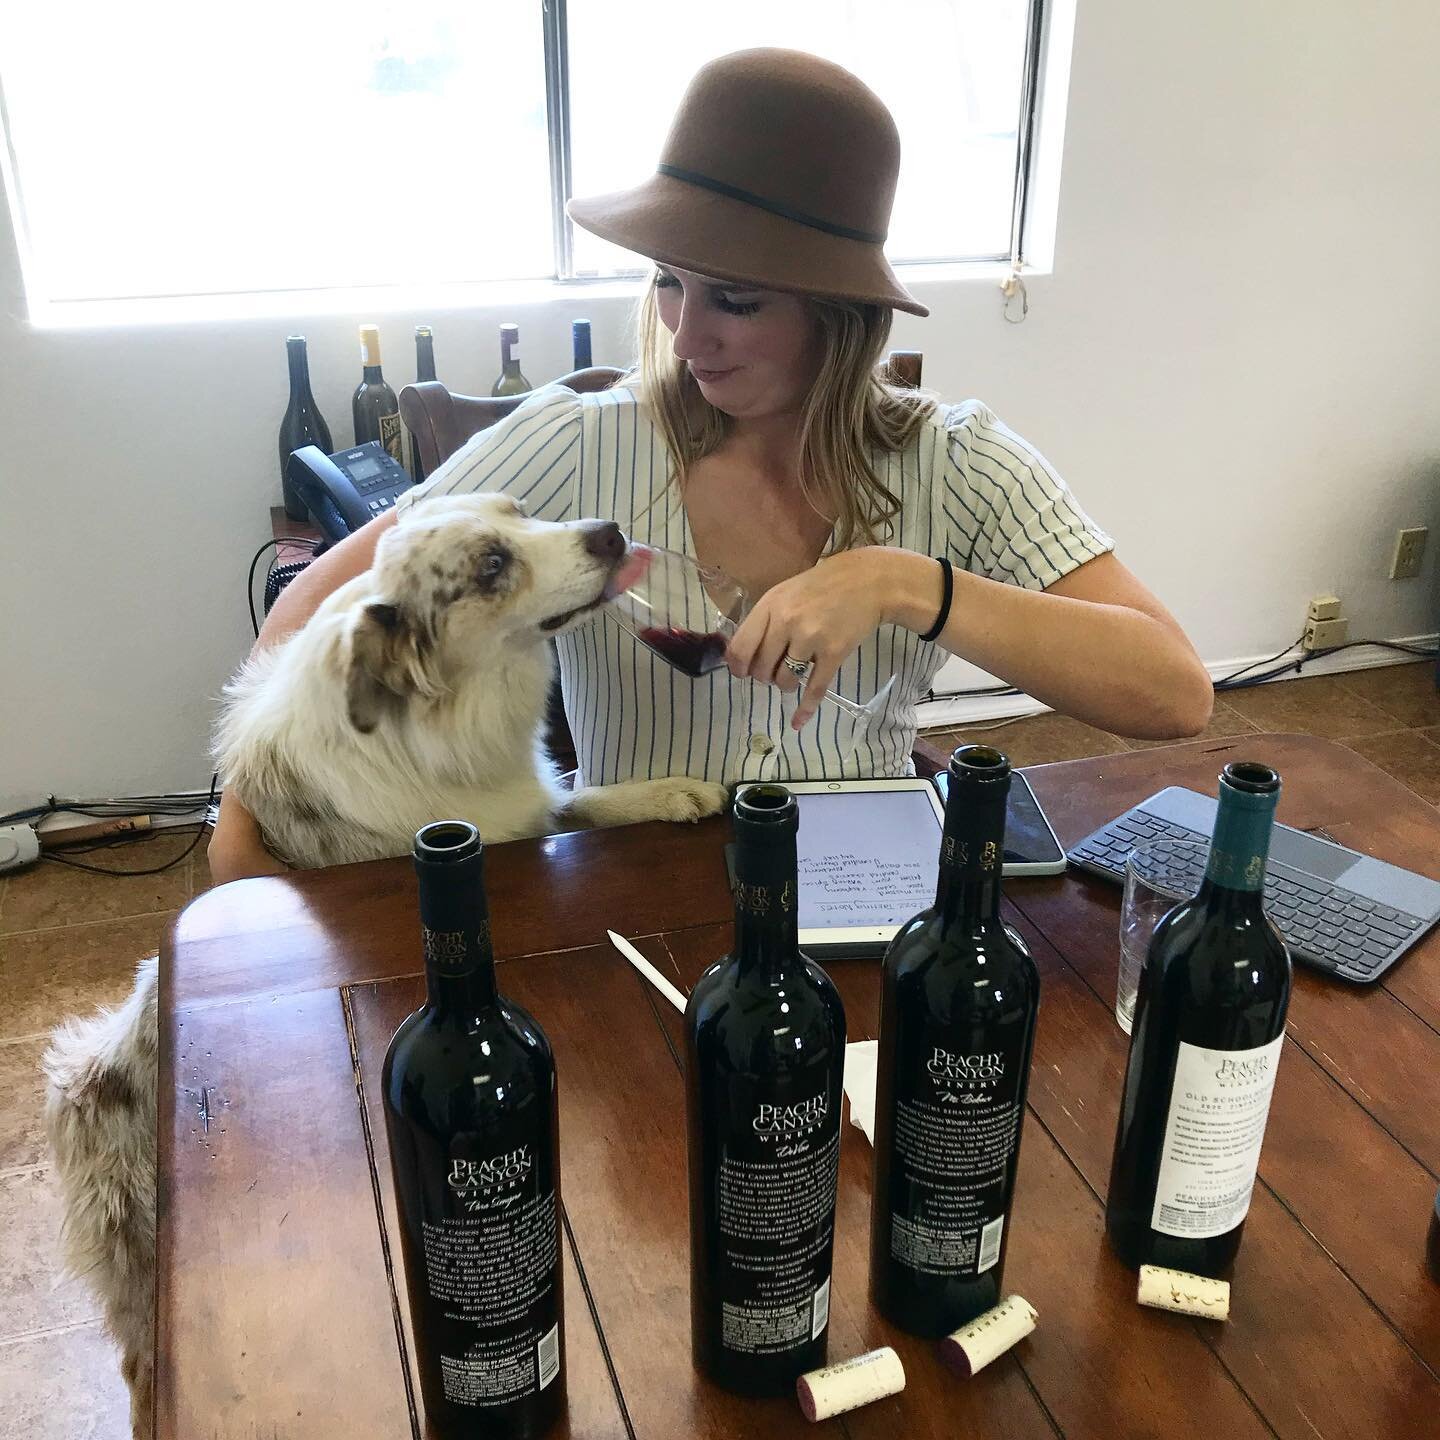 People always ask us who writes our tasting notes&hellip;and now you know! Thanks Tule for your input 🍷🐶
-
-
-
-
#peachycanyonwinery #peachycanyonwines #fallwineclubrelease #newwines #fallwines #2020vintage #tastingnotes #winetasting #winedogs #win